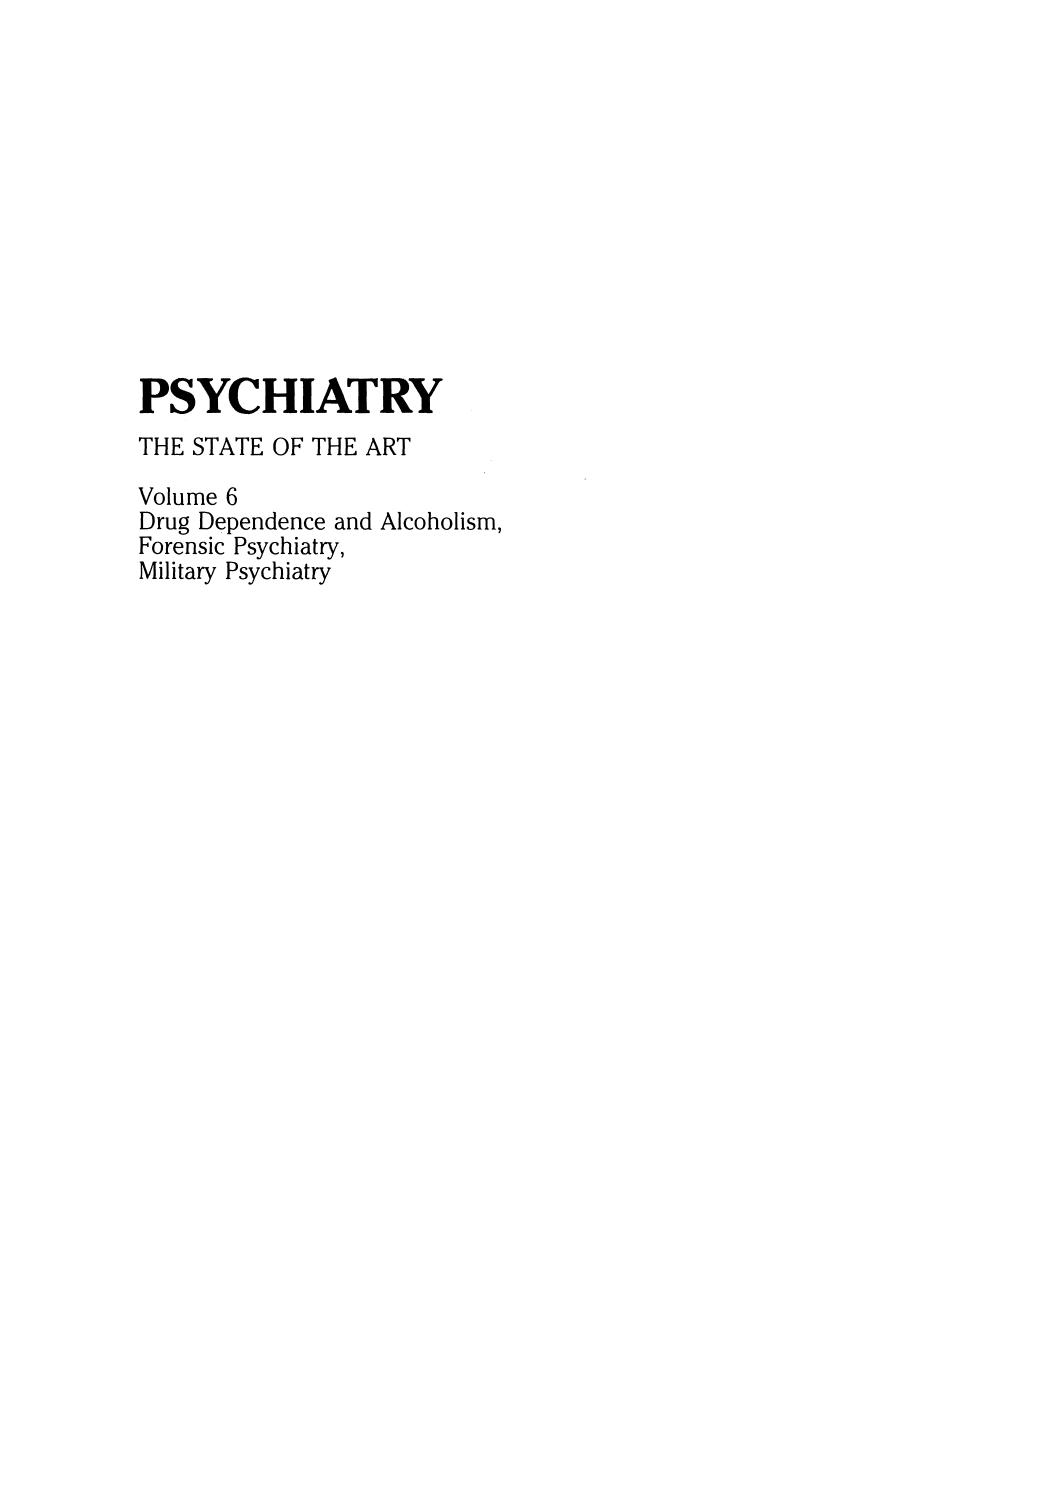 Psychiatry  The State of the Art Volume 6 Drug Dependence and Alcoholism, Forensic Psychiatry, Military Psychiatry